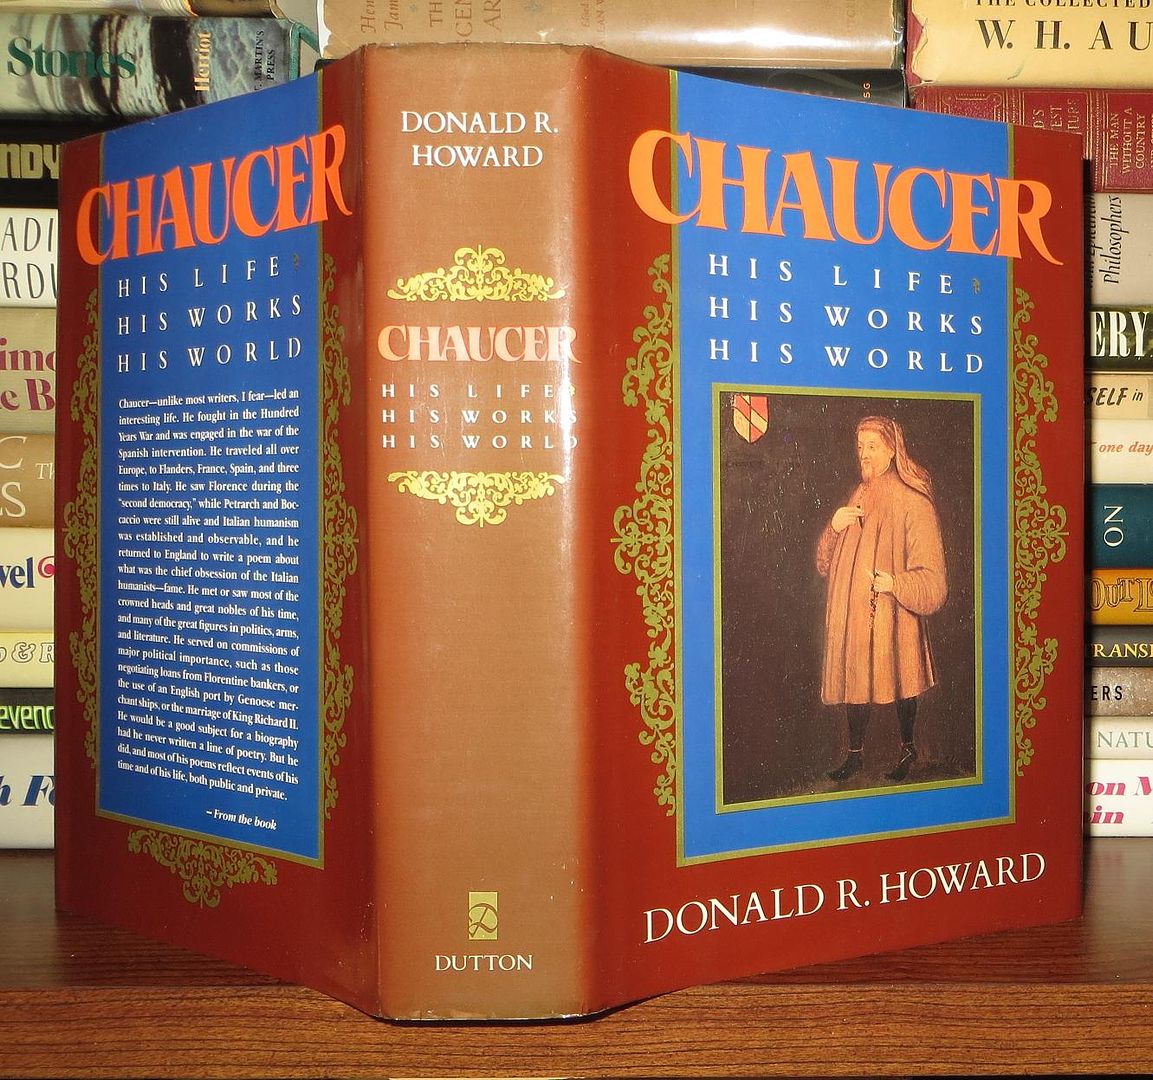 HOWARD, DONALD R. - Chaucer His Life, His Works, His World